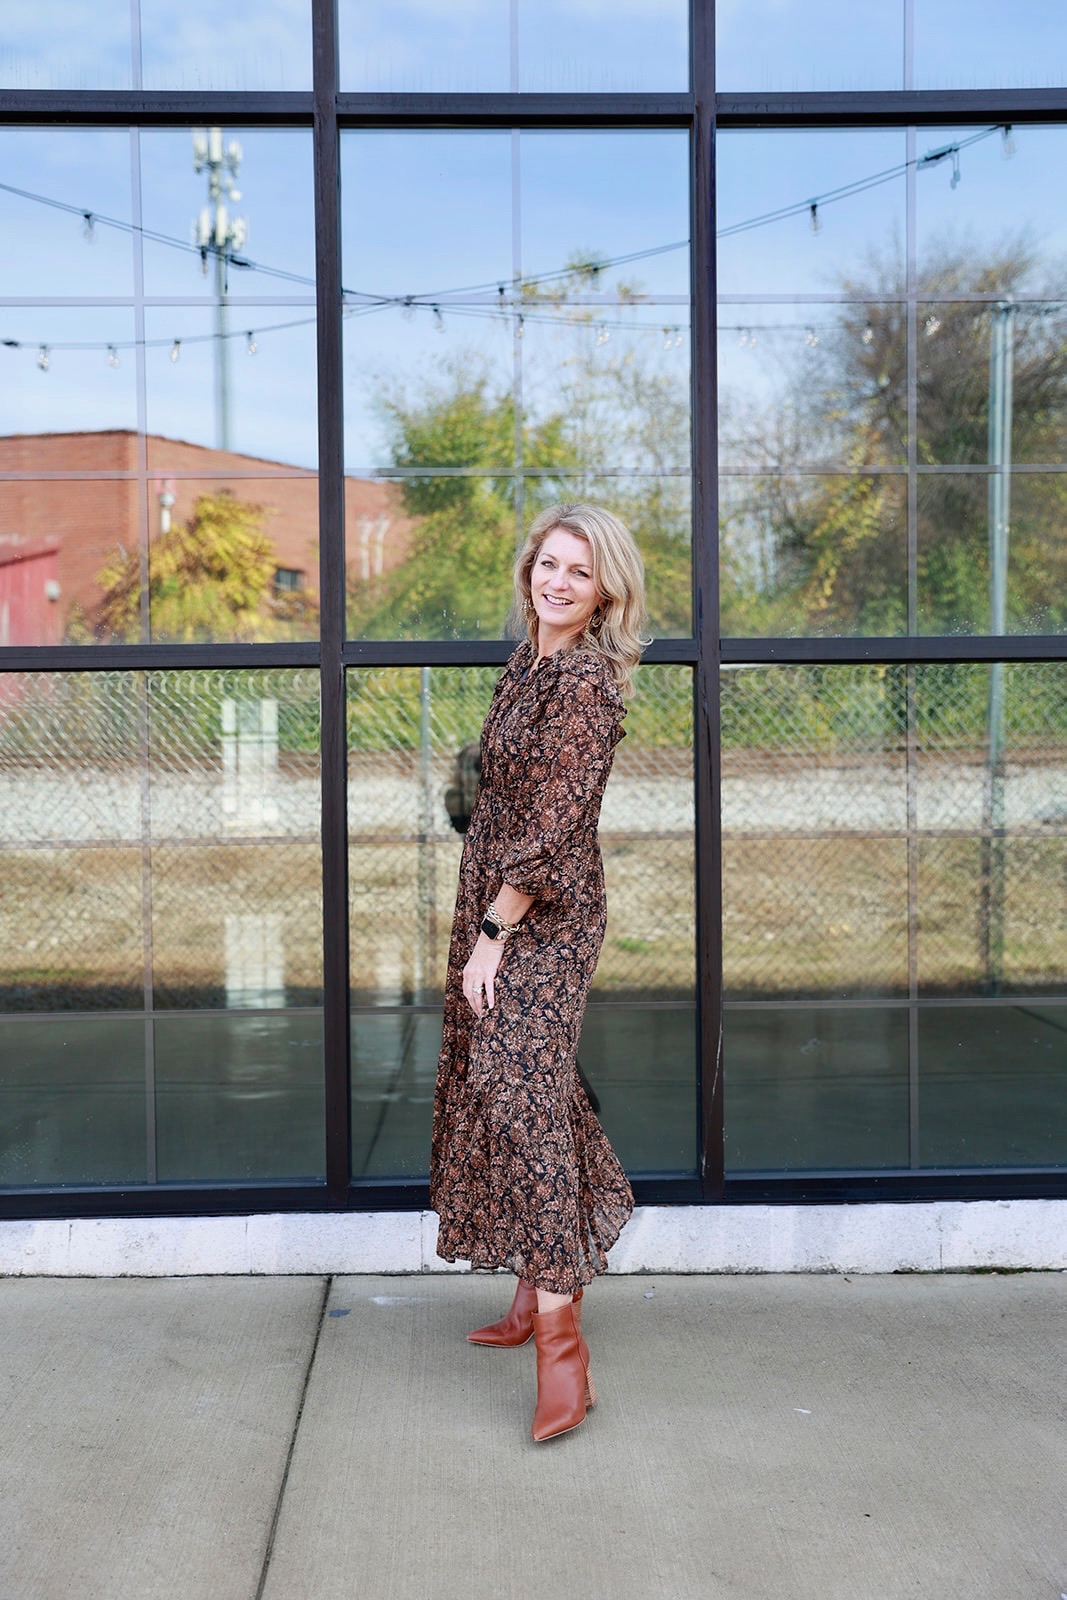 Nashville Personal Stylists: What To Wear For Thanksgiving floral maxi dress and booties how to wear booties with a dress what to wear for thanksgiving how to style a dress for thanksgiving how to accessorize a maxi dress for fall